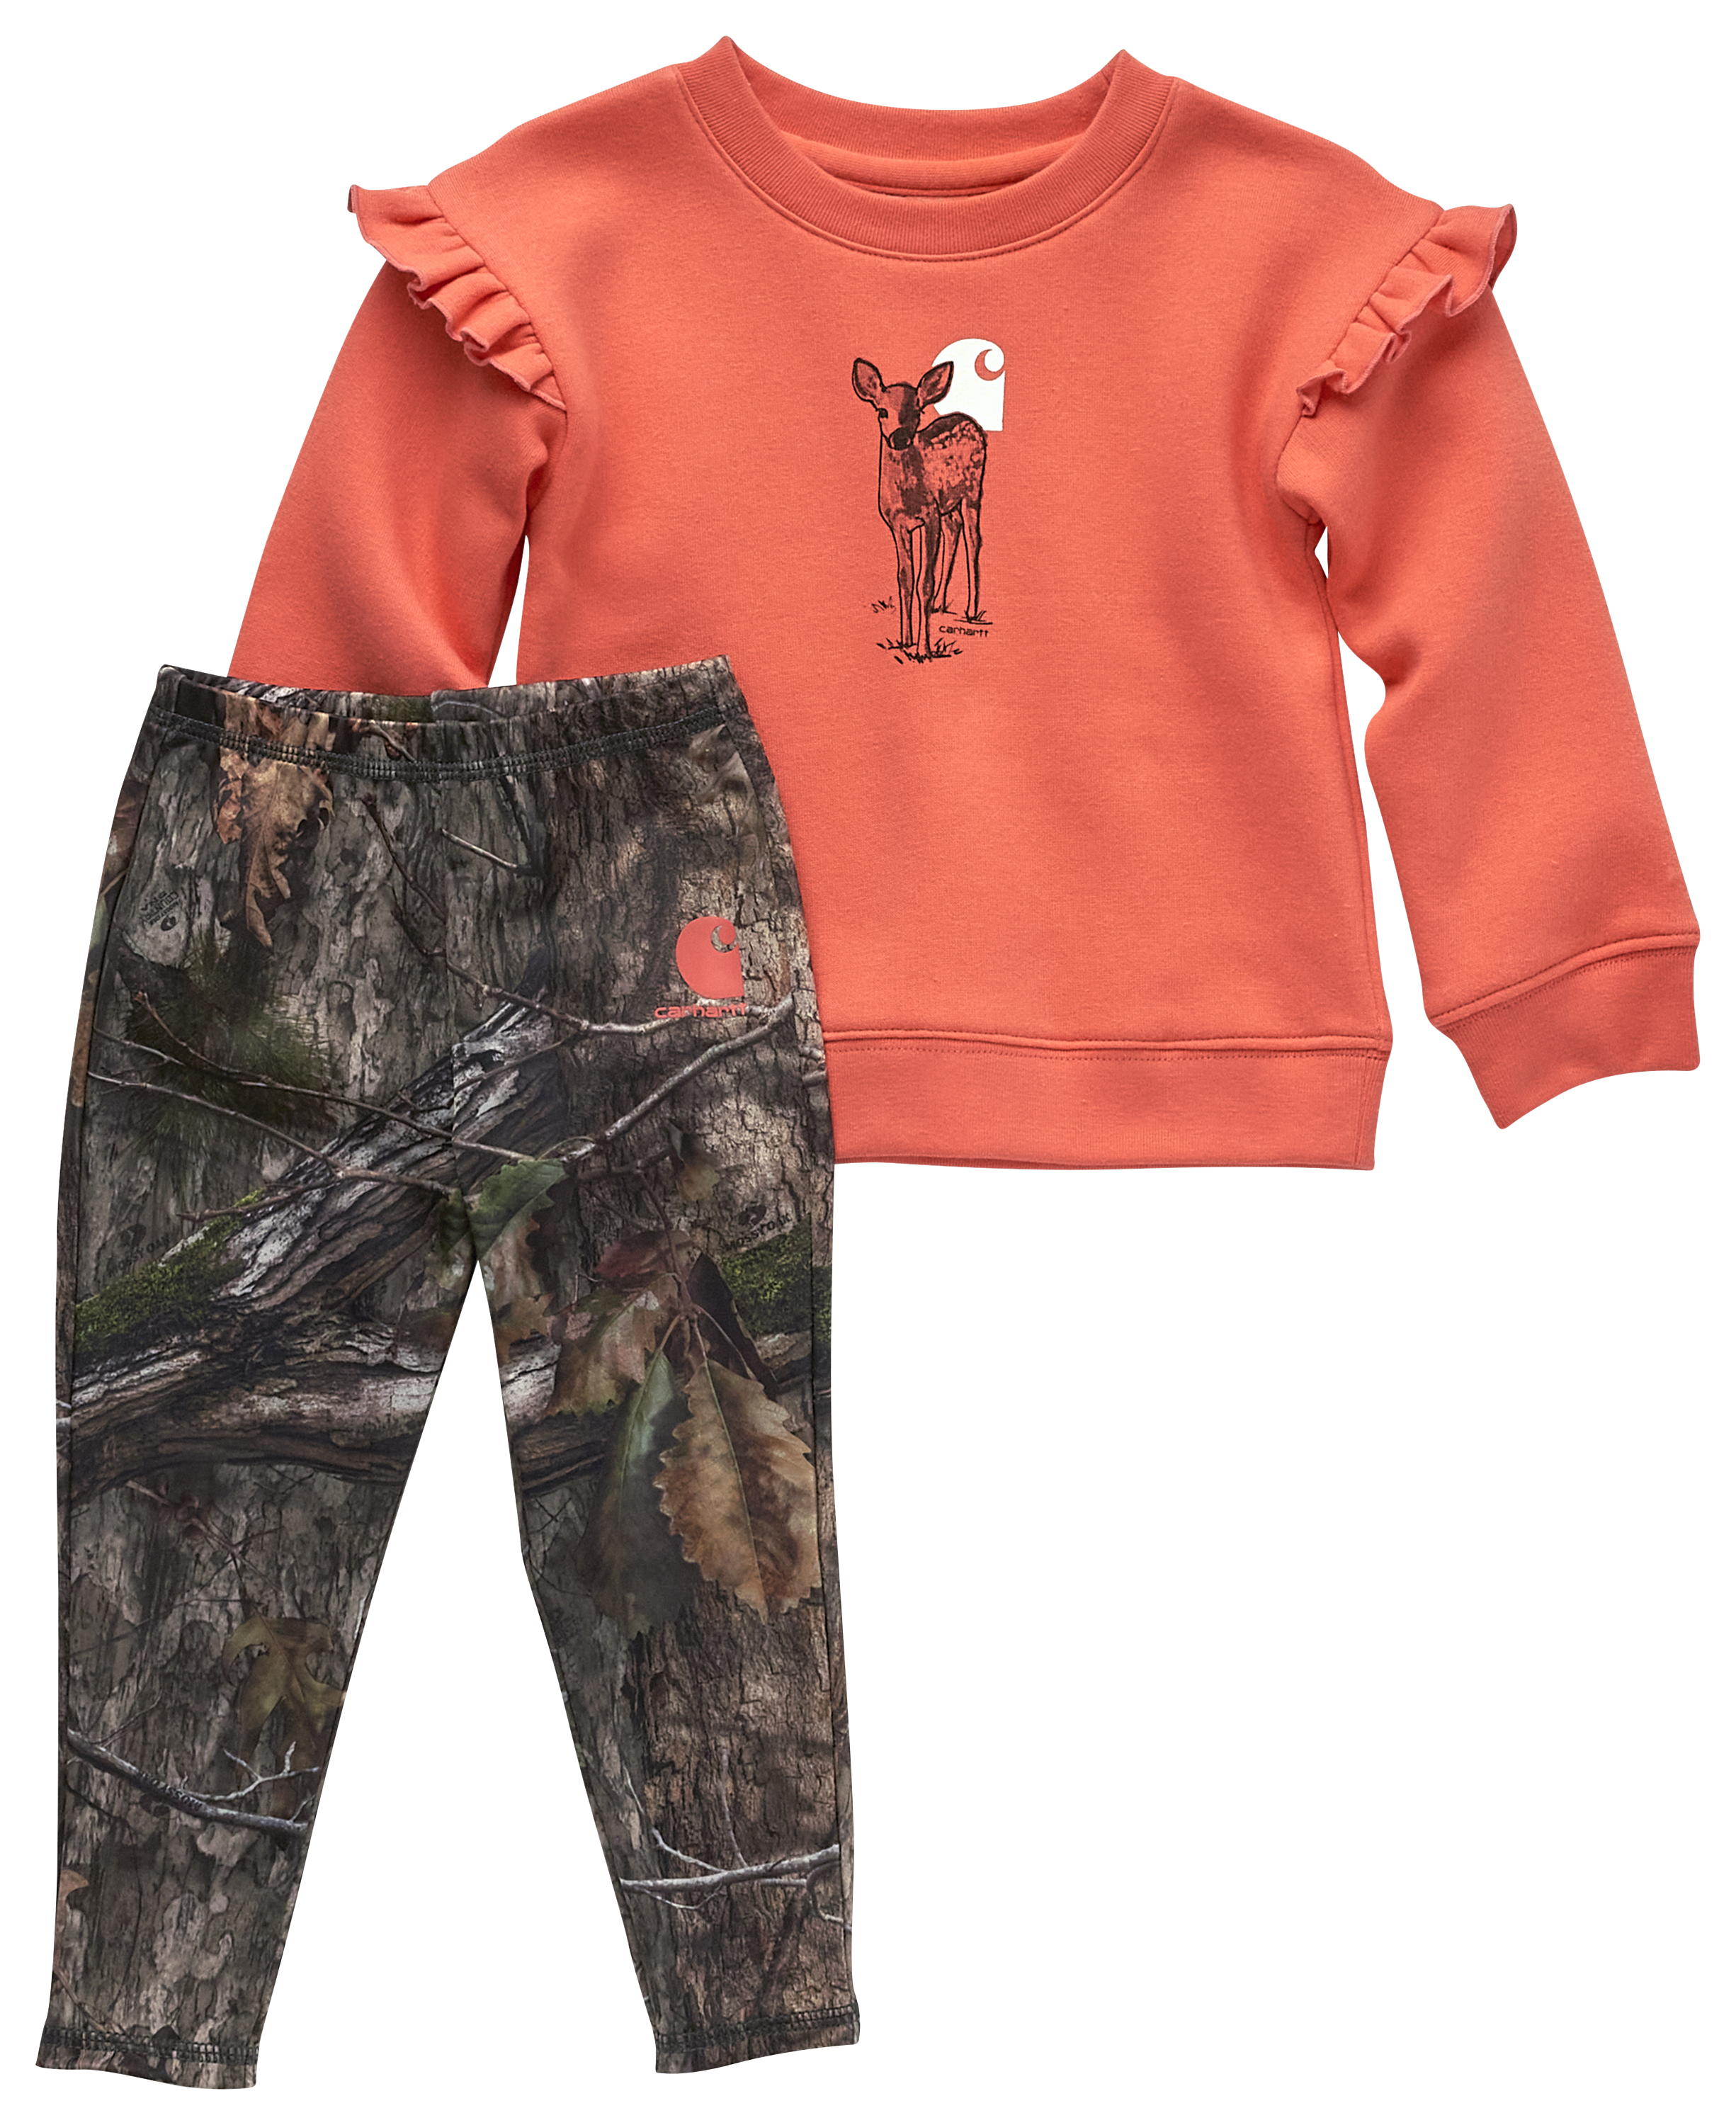 Carhartt Deer Long-Sleeve T-Shirt and Camo Leggings 2-Piece Set for Toddlers - Mossy Oak Country DNA - 3T